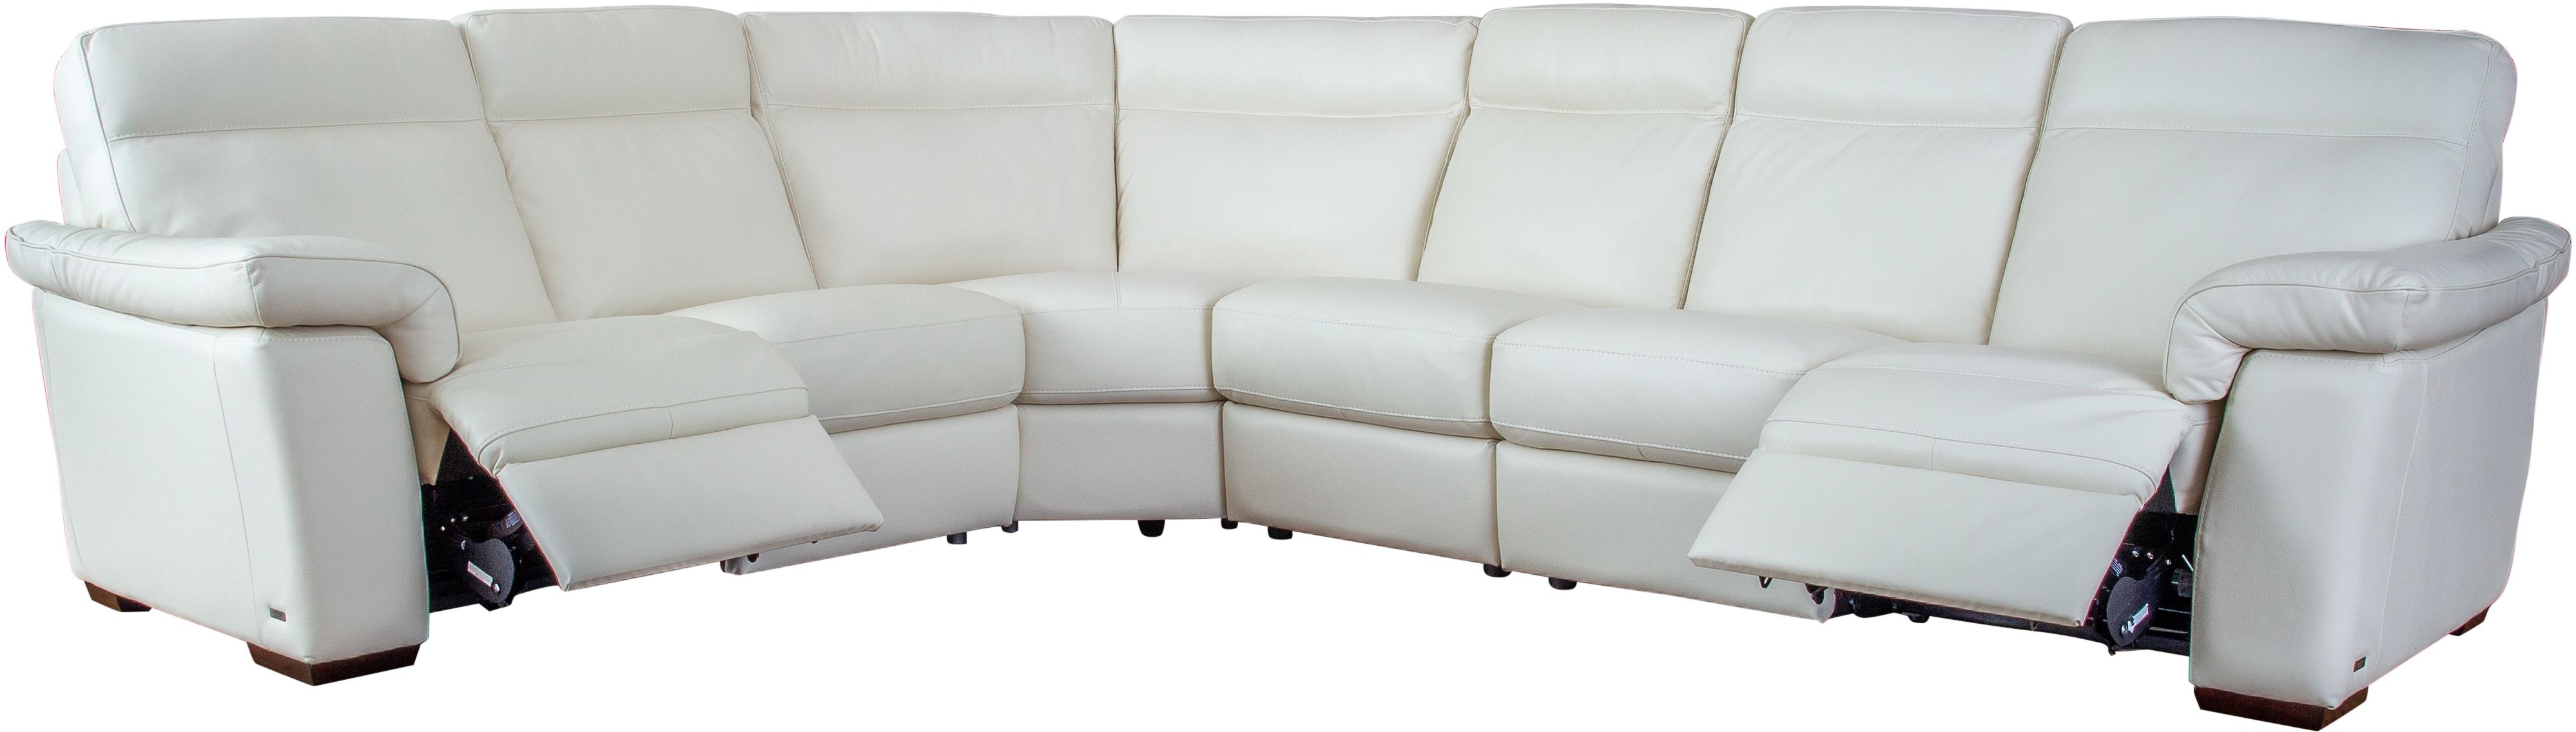 - Natuzzi Editions Power Florida Gallery FL Reclining Myers, - Sectional Leather Fort 4pc